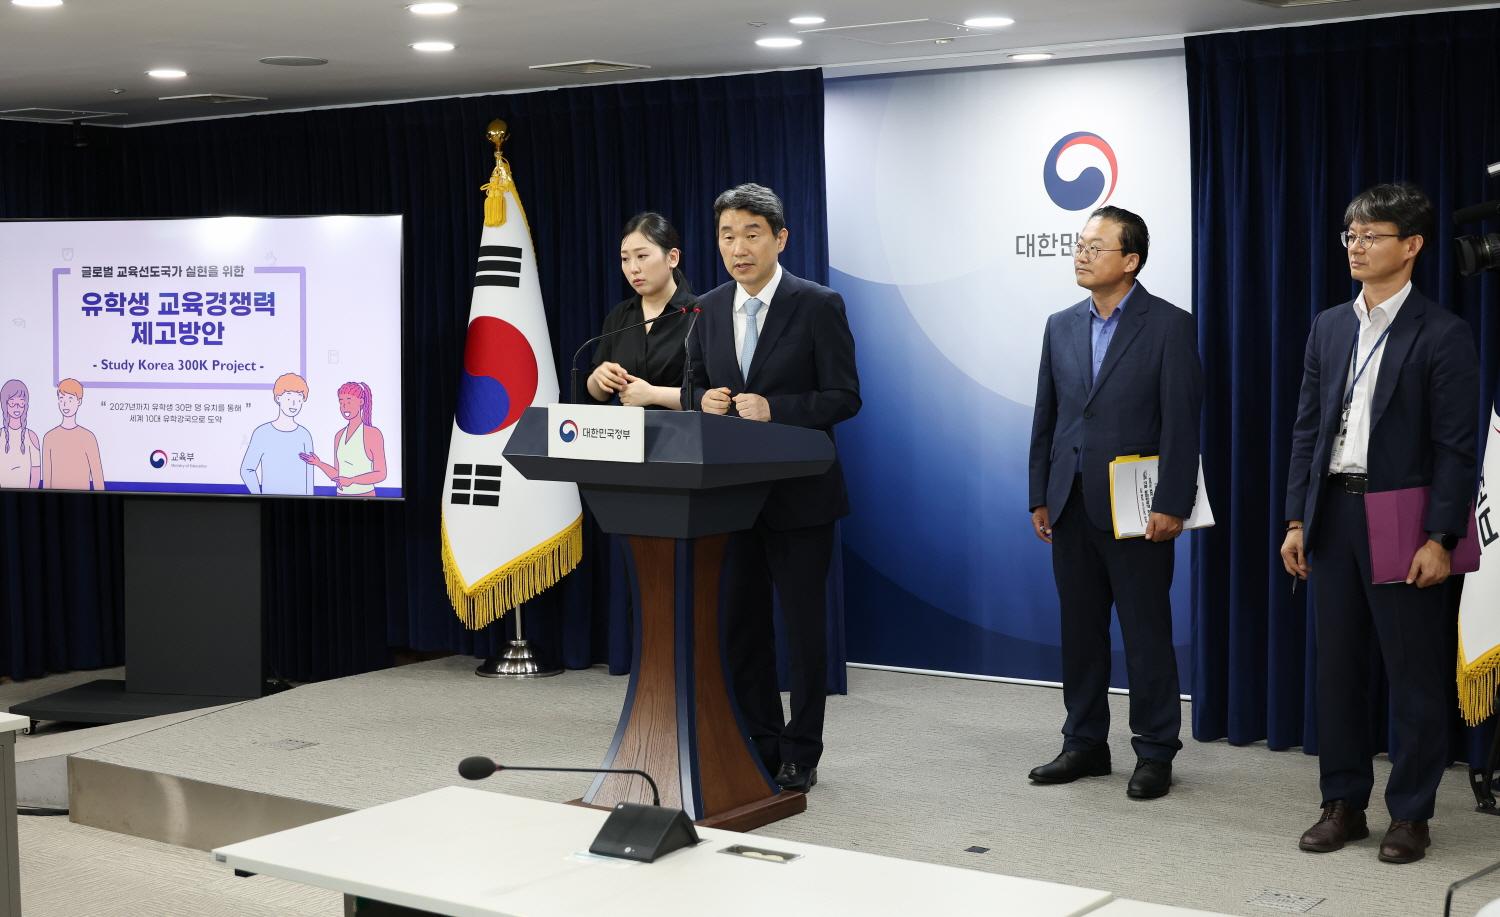 Ministry of Education Announces Study Korea 300K Project (2)